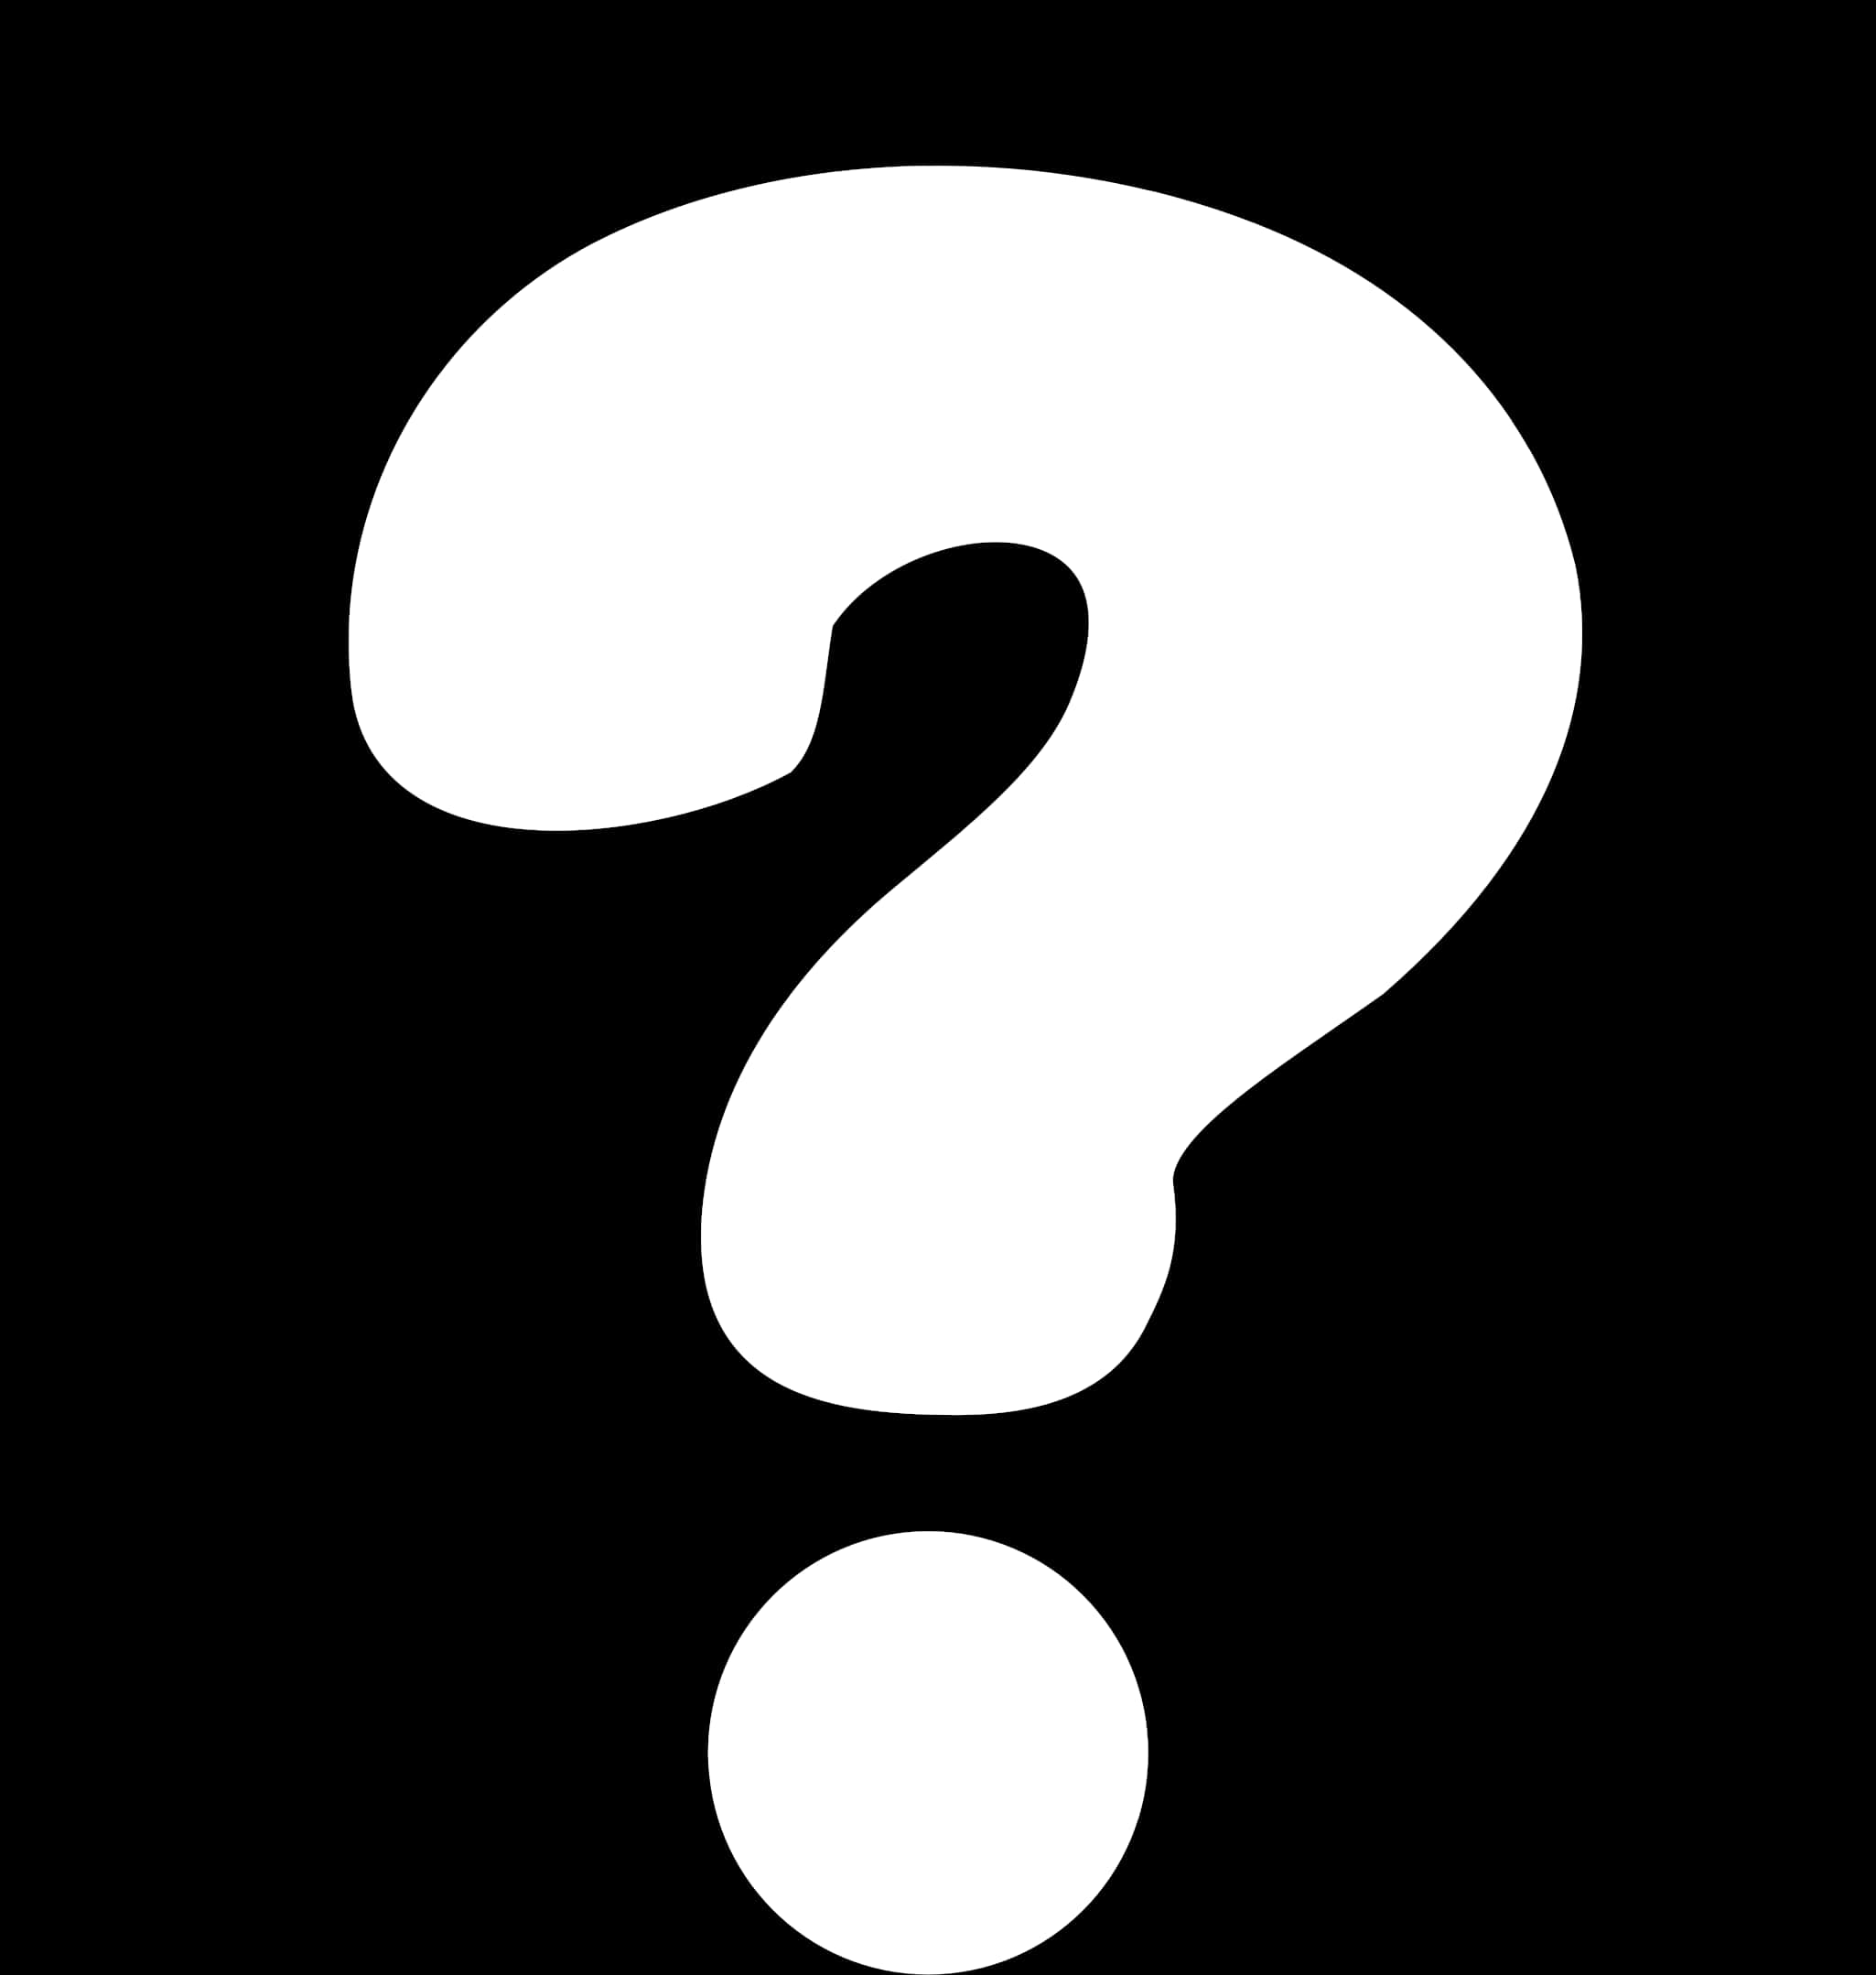 A White Question Mark On A Black Background